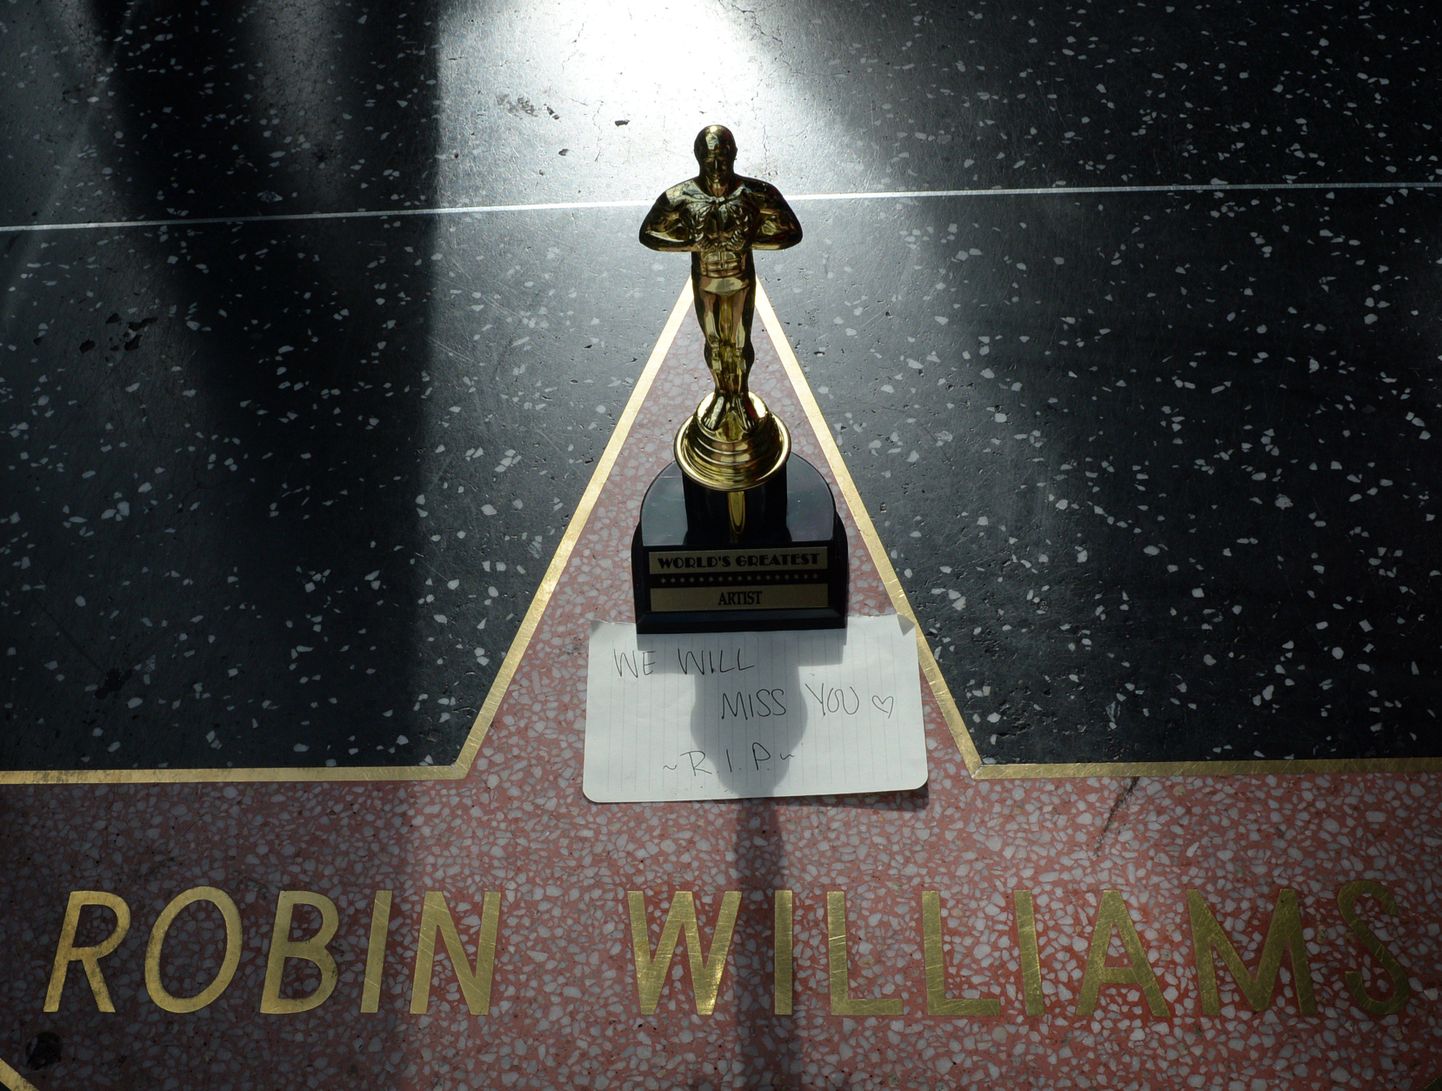 A minature Oscars statue and an "I will miss you" note is seen at Robin Williams' star on the Hollywood Walk of Fame is seen, August 11, 2014, in Hollywood, California.  Academy Award-winning actor and comedian Robin Williams was found dead in his Marin County home earlier today of an apparent suicide. He was 63 years old.         AFP PHOTO/Mark RALSTON